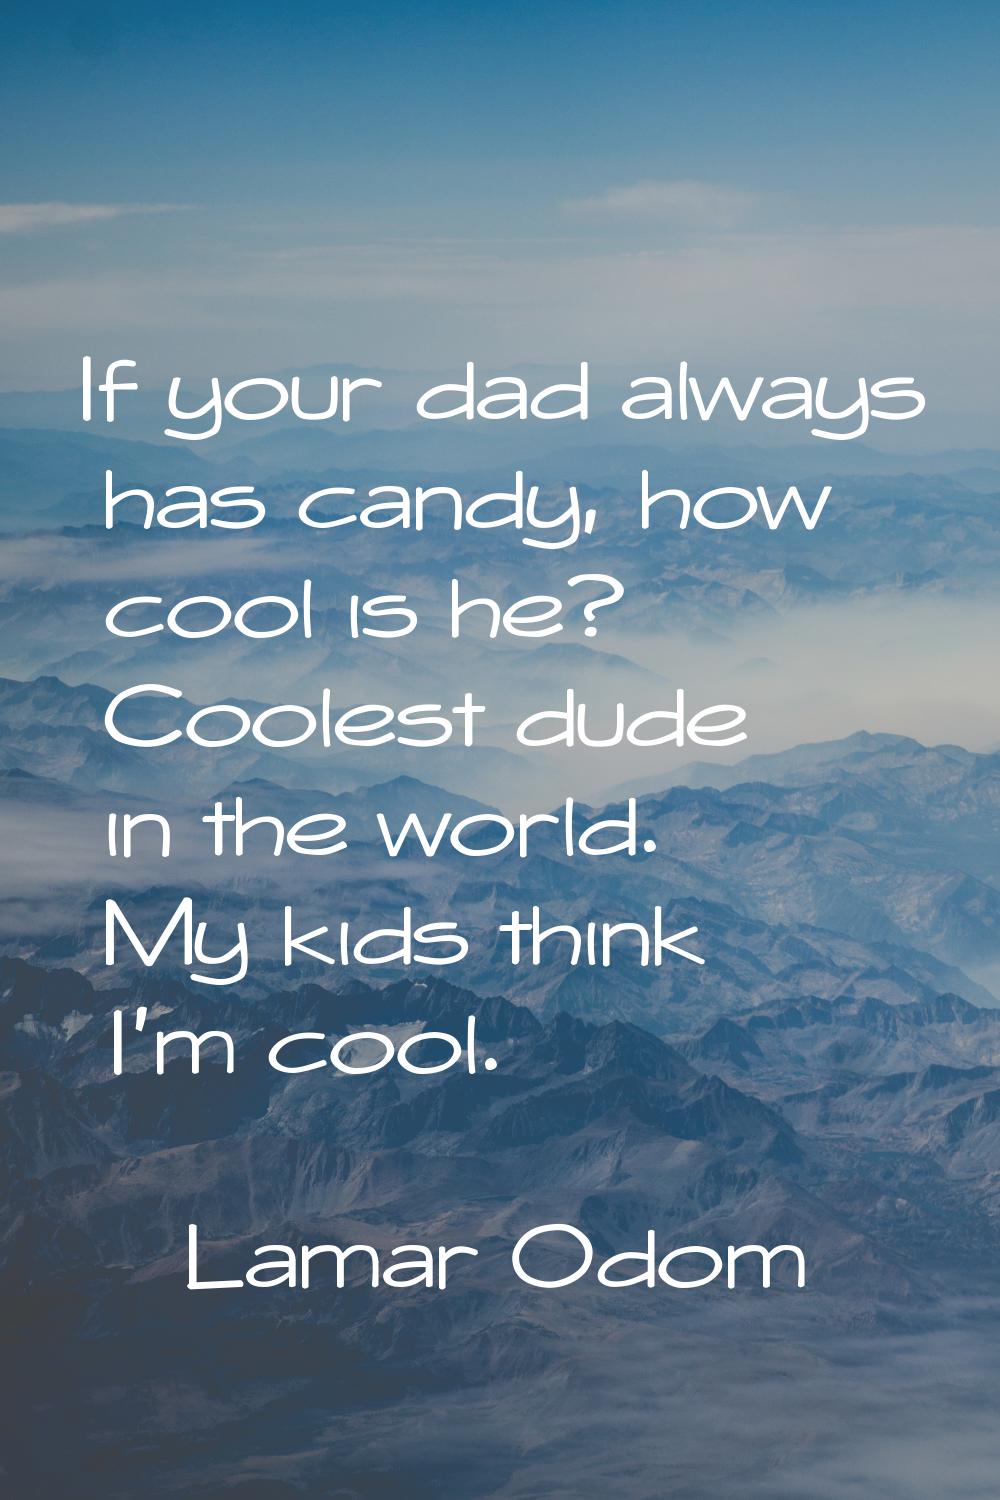 If your dad always has candy, how cool is he? Coolest dude in the world. My kids think I'm cool.